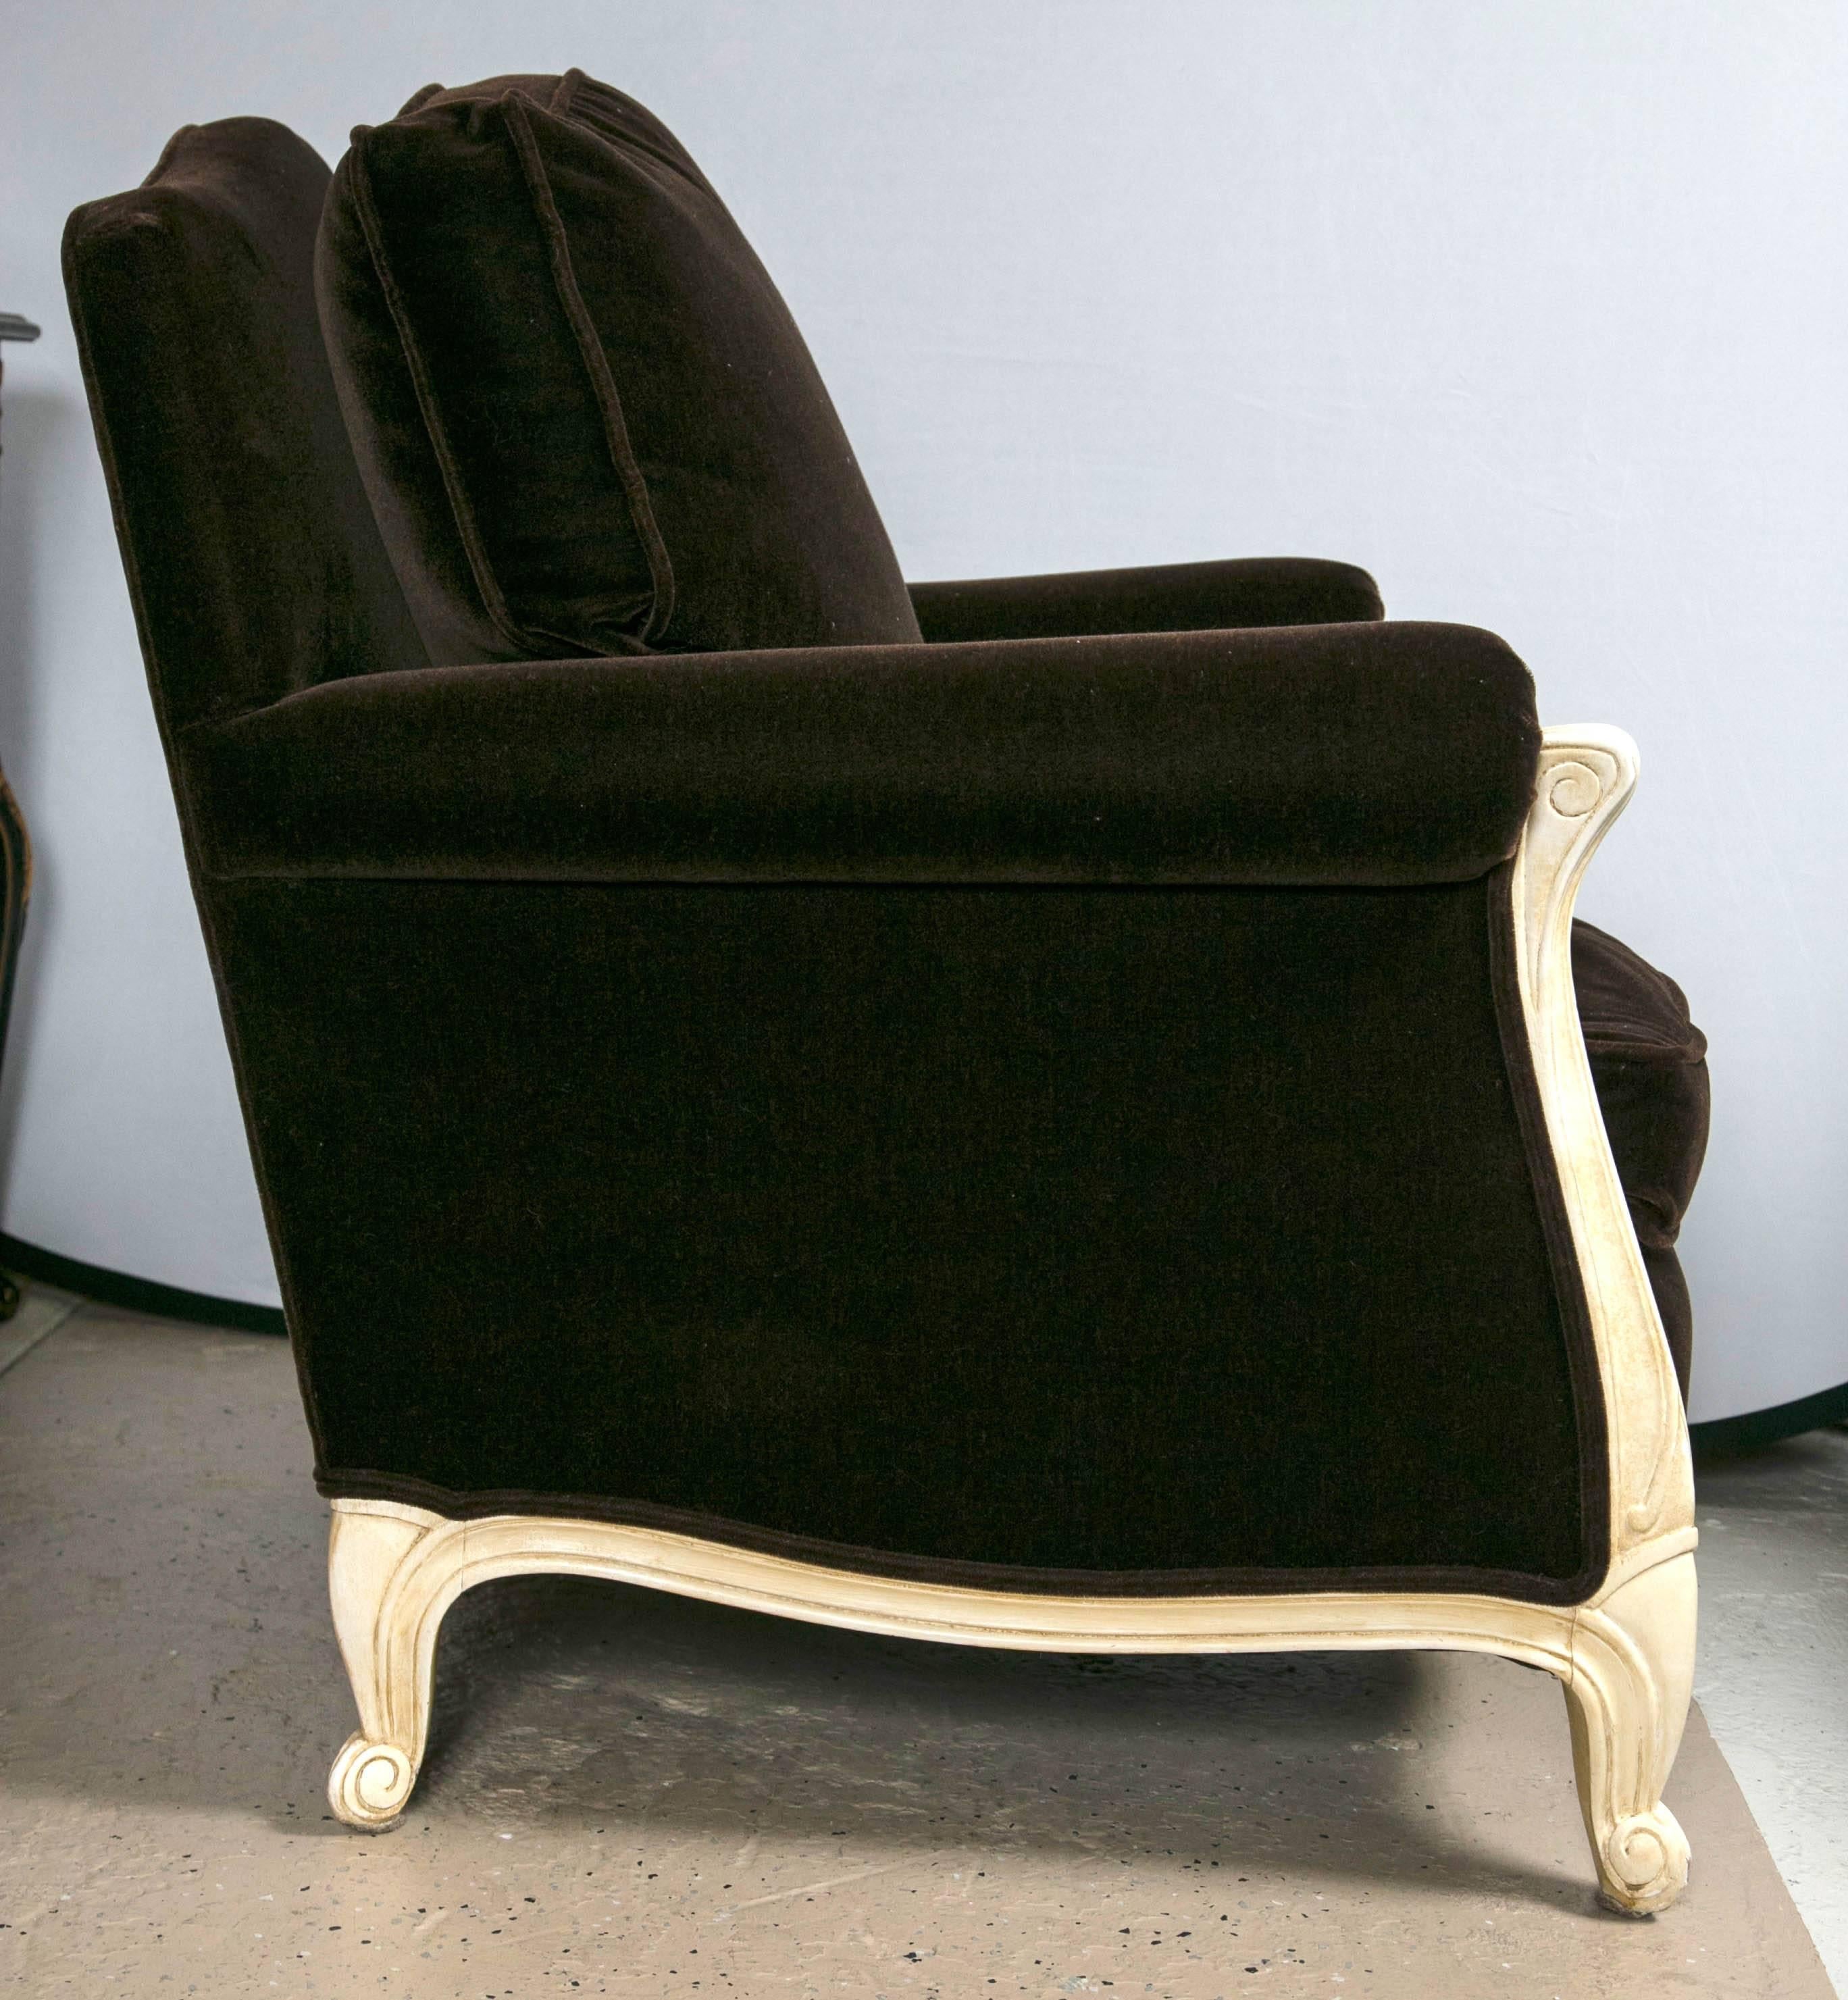 French ON SALE NOW! SALE! Pair of  Gorgeous Chocolate Mohair Down Chairs Louis XV Style